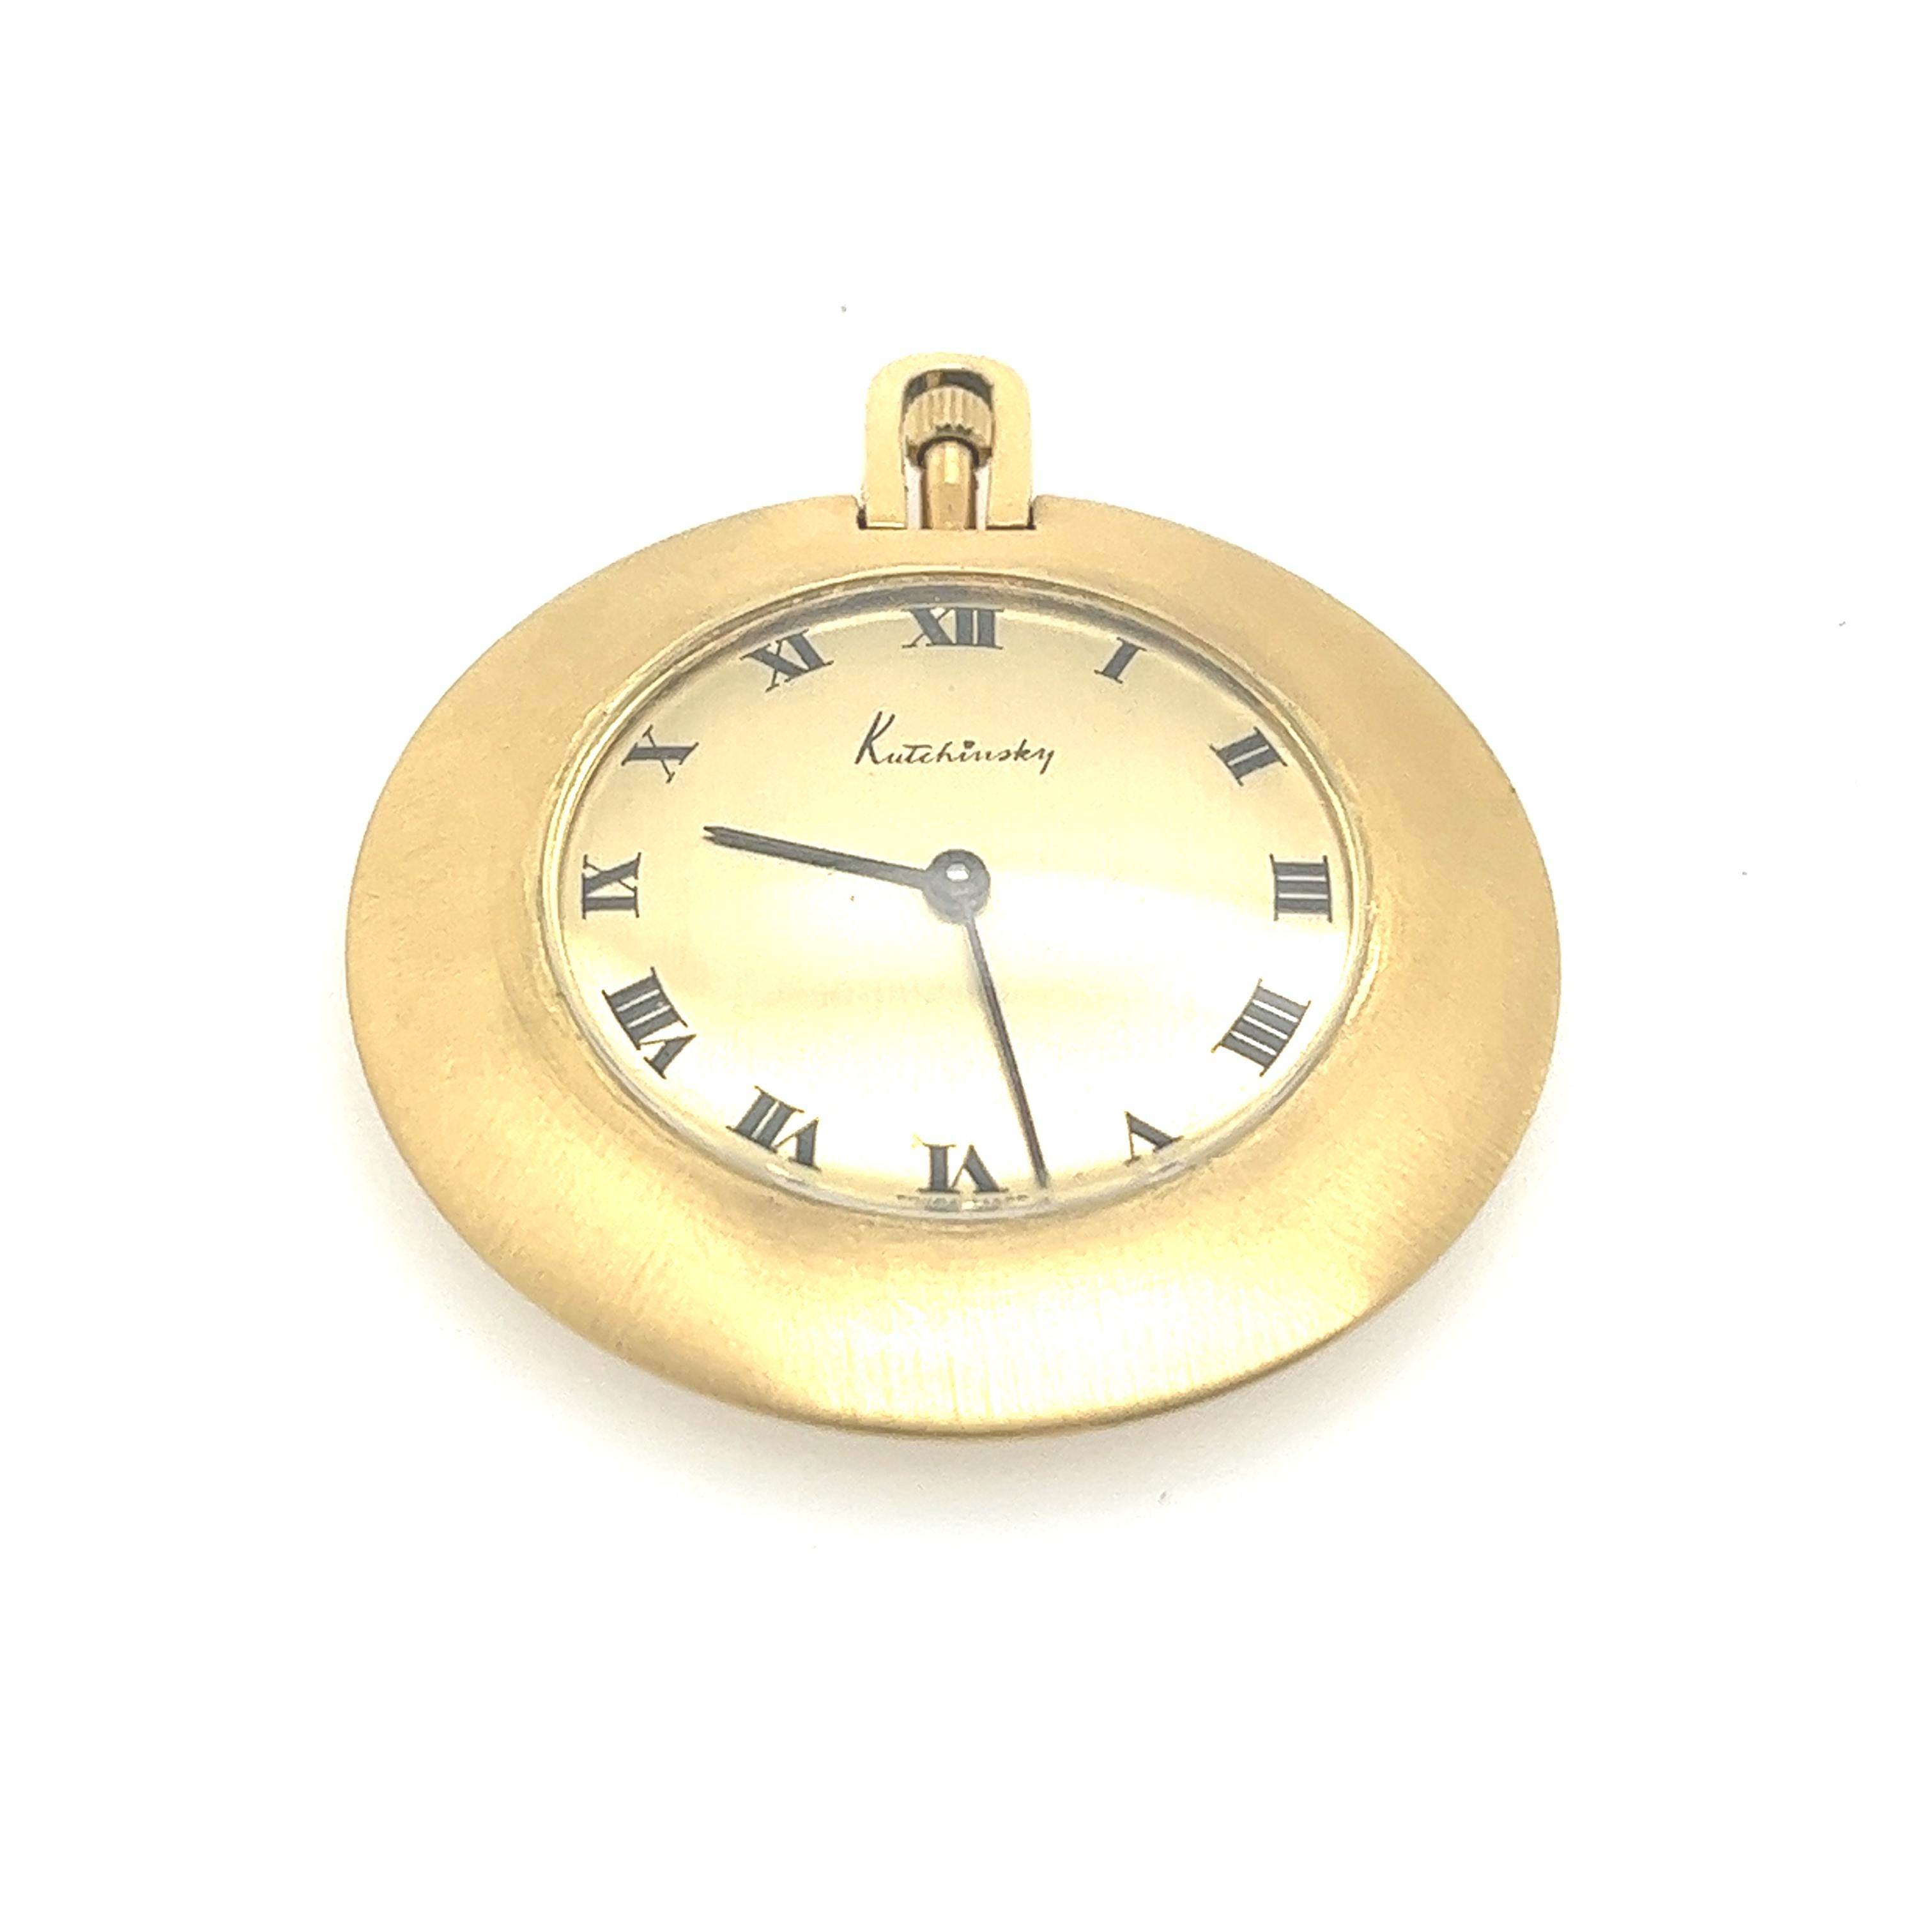 Fine Quality 18ct Yellow Gold Kutchinsky 39mm Pocket Watch In Working Condition

Additional Information:
Serial Number: 57424
Case Material: 18ct Yellow Gold
Number of Jewels: 17
Pocket Watch Size: 39mm
In good working condition.
SMS2741